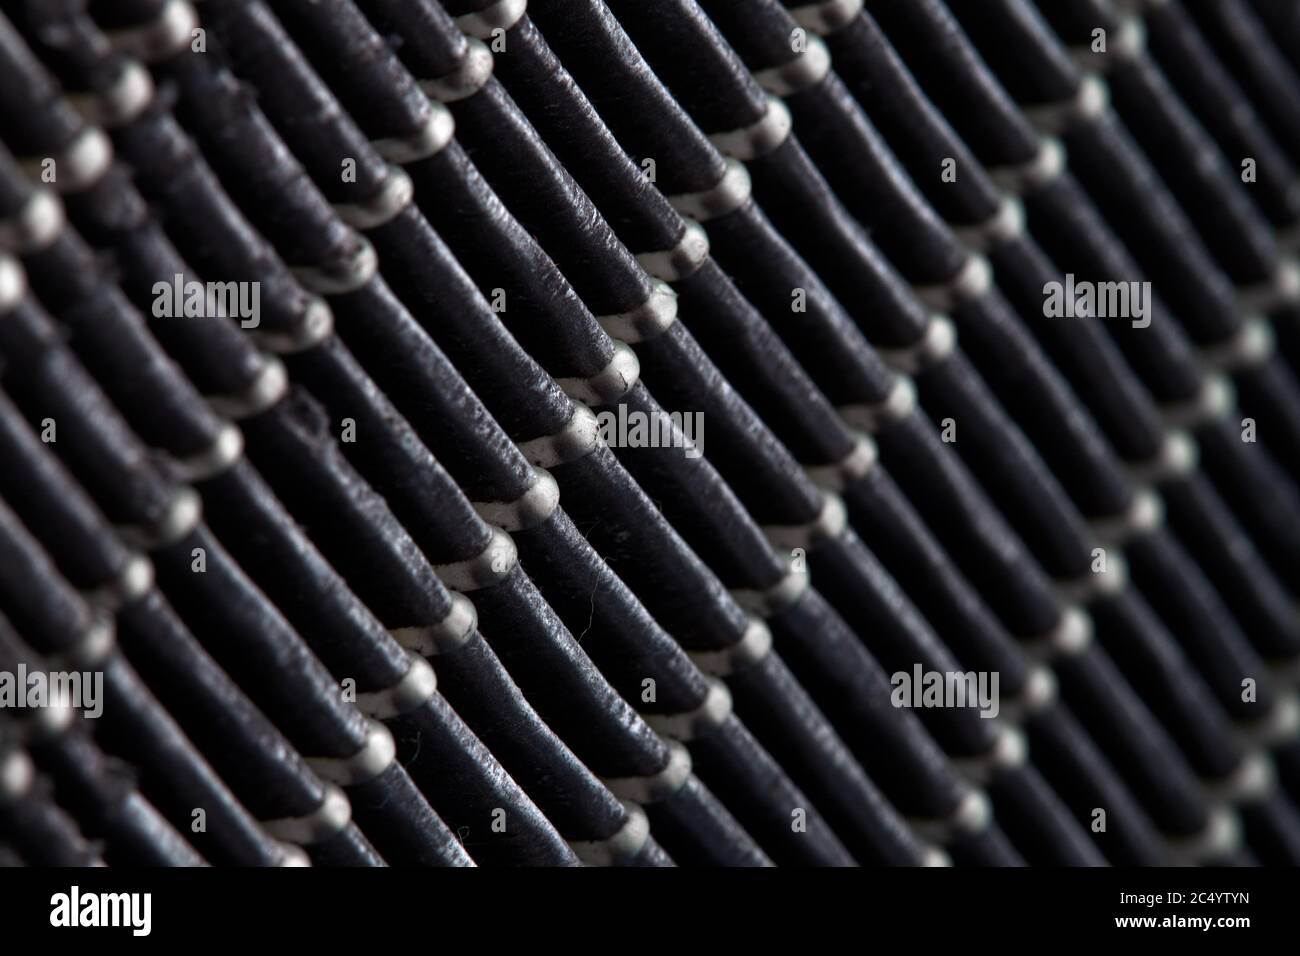 Dirty air filter. High efficiency air filter for HVAC system. Stock Photo